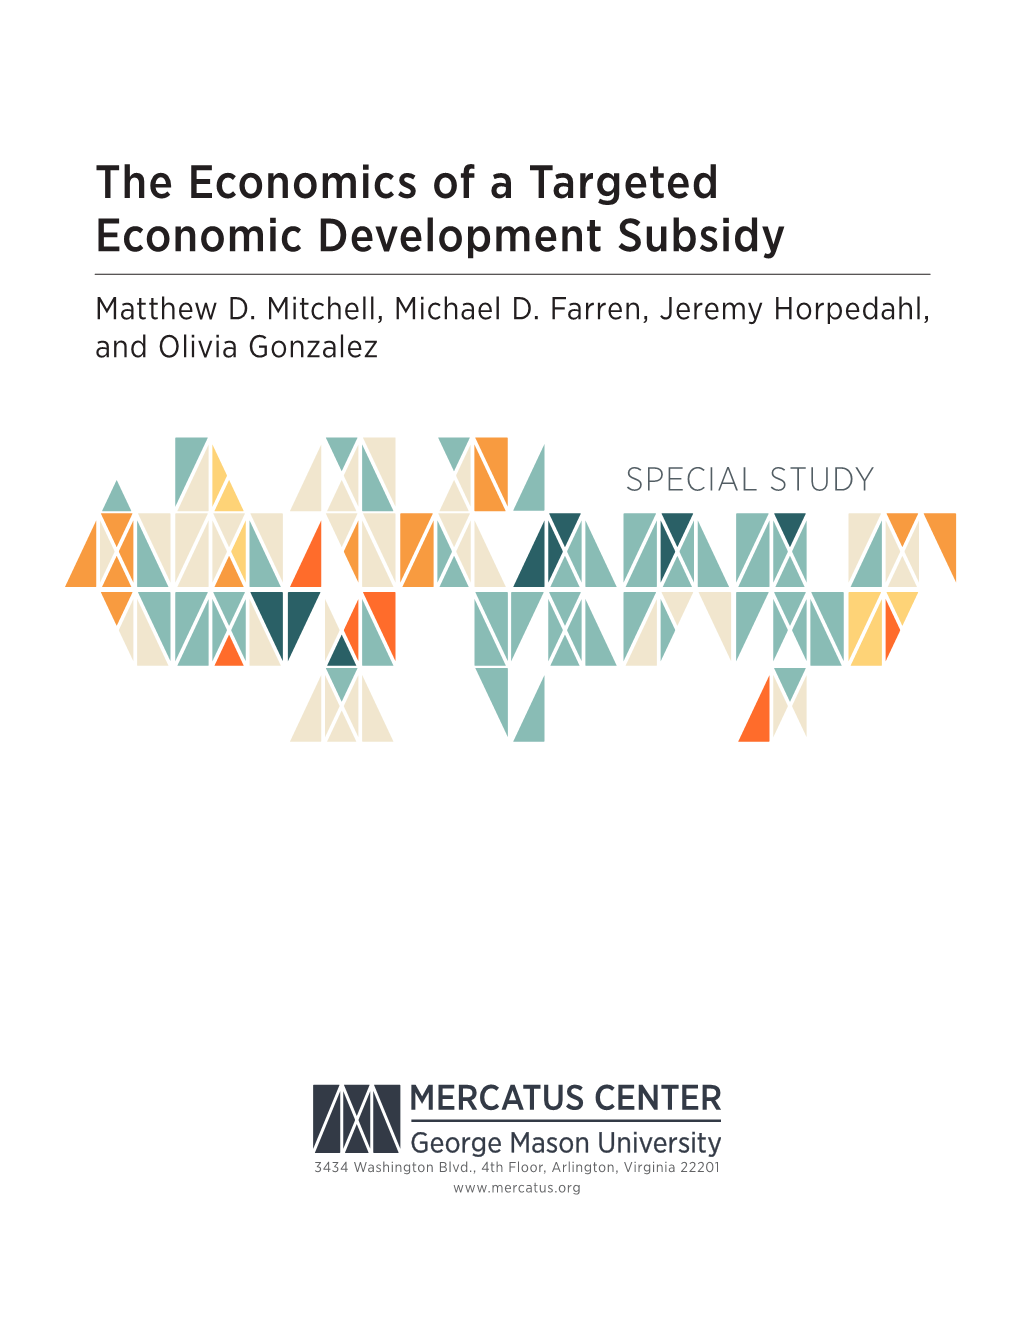 The Economics of a Targeted Economic Development Subsidy